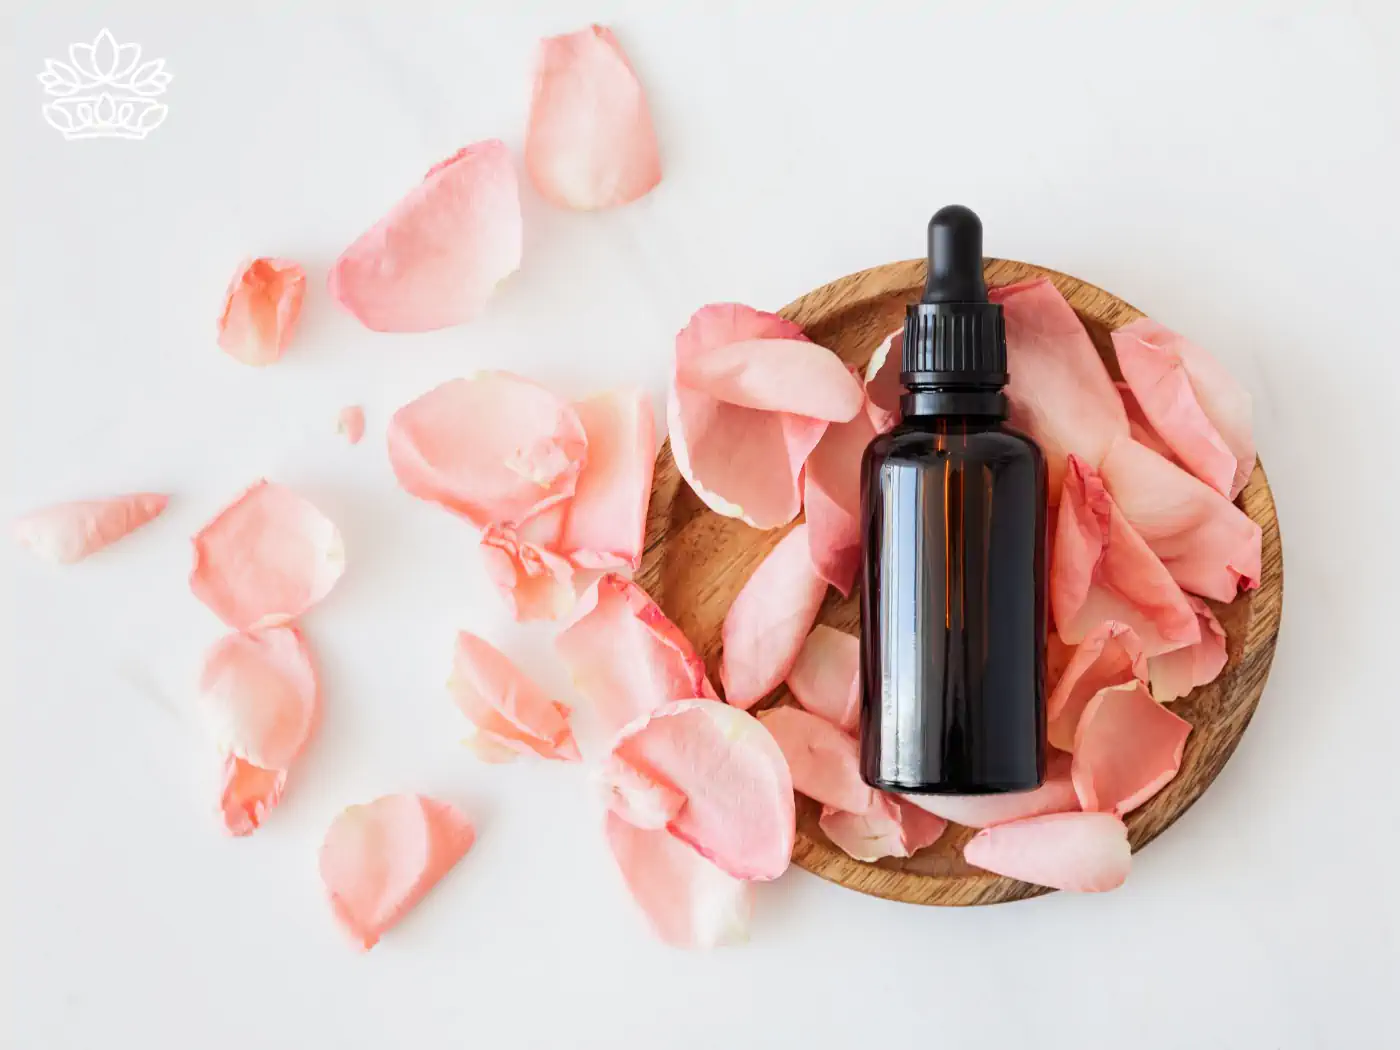 Essential oil bottle on a wooden dish with pink rose petals. Collection: Essential Oils, Fabulous Flowers & Gifts.